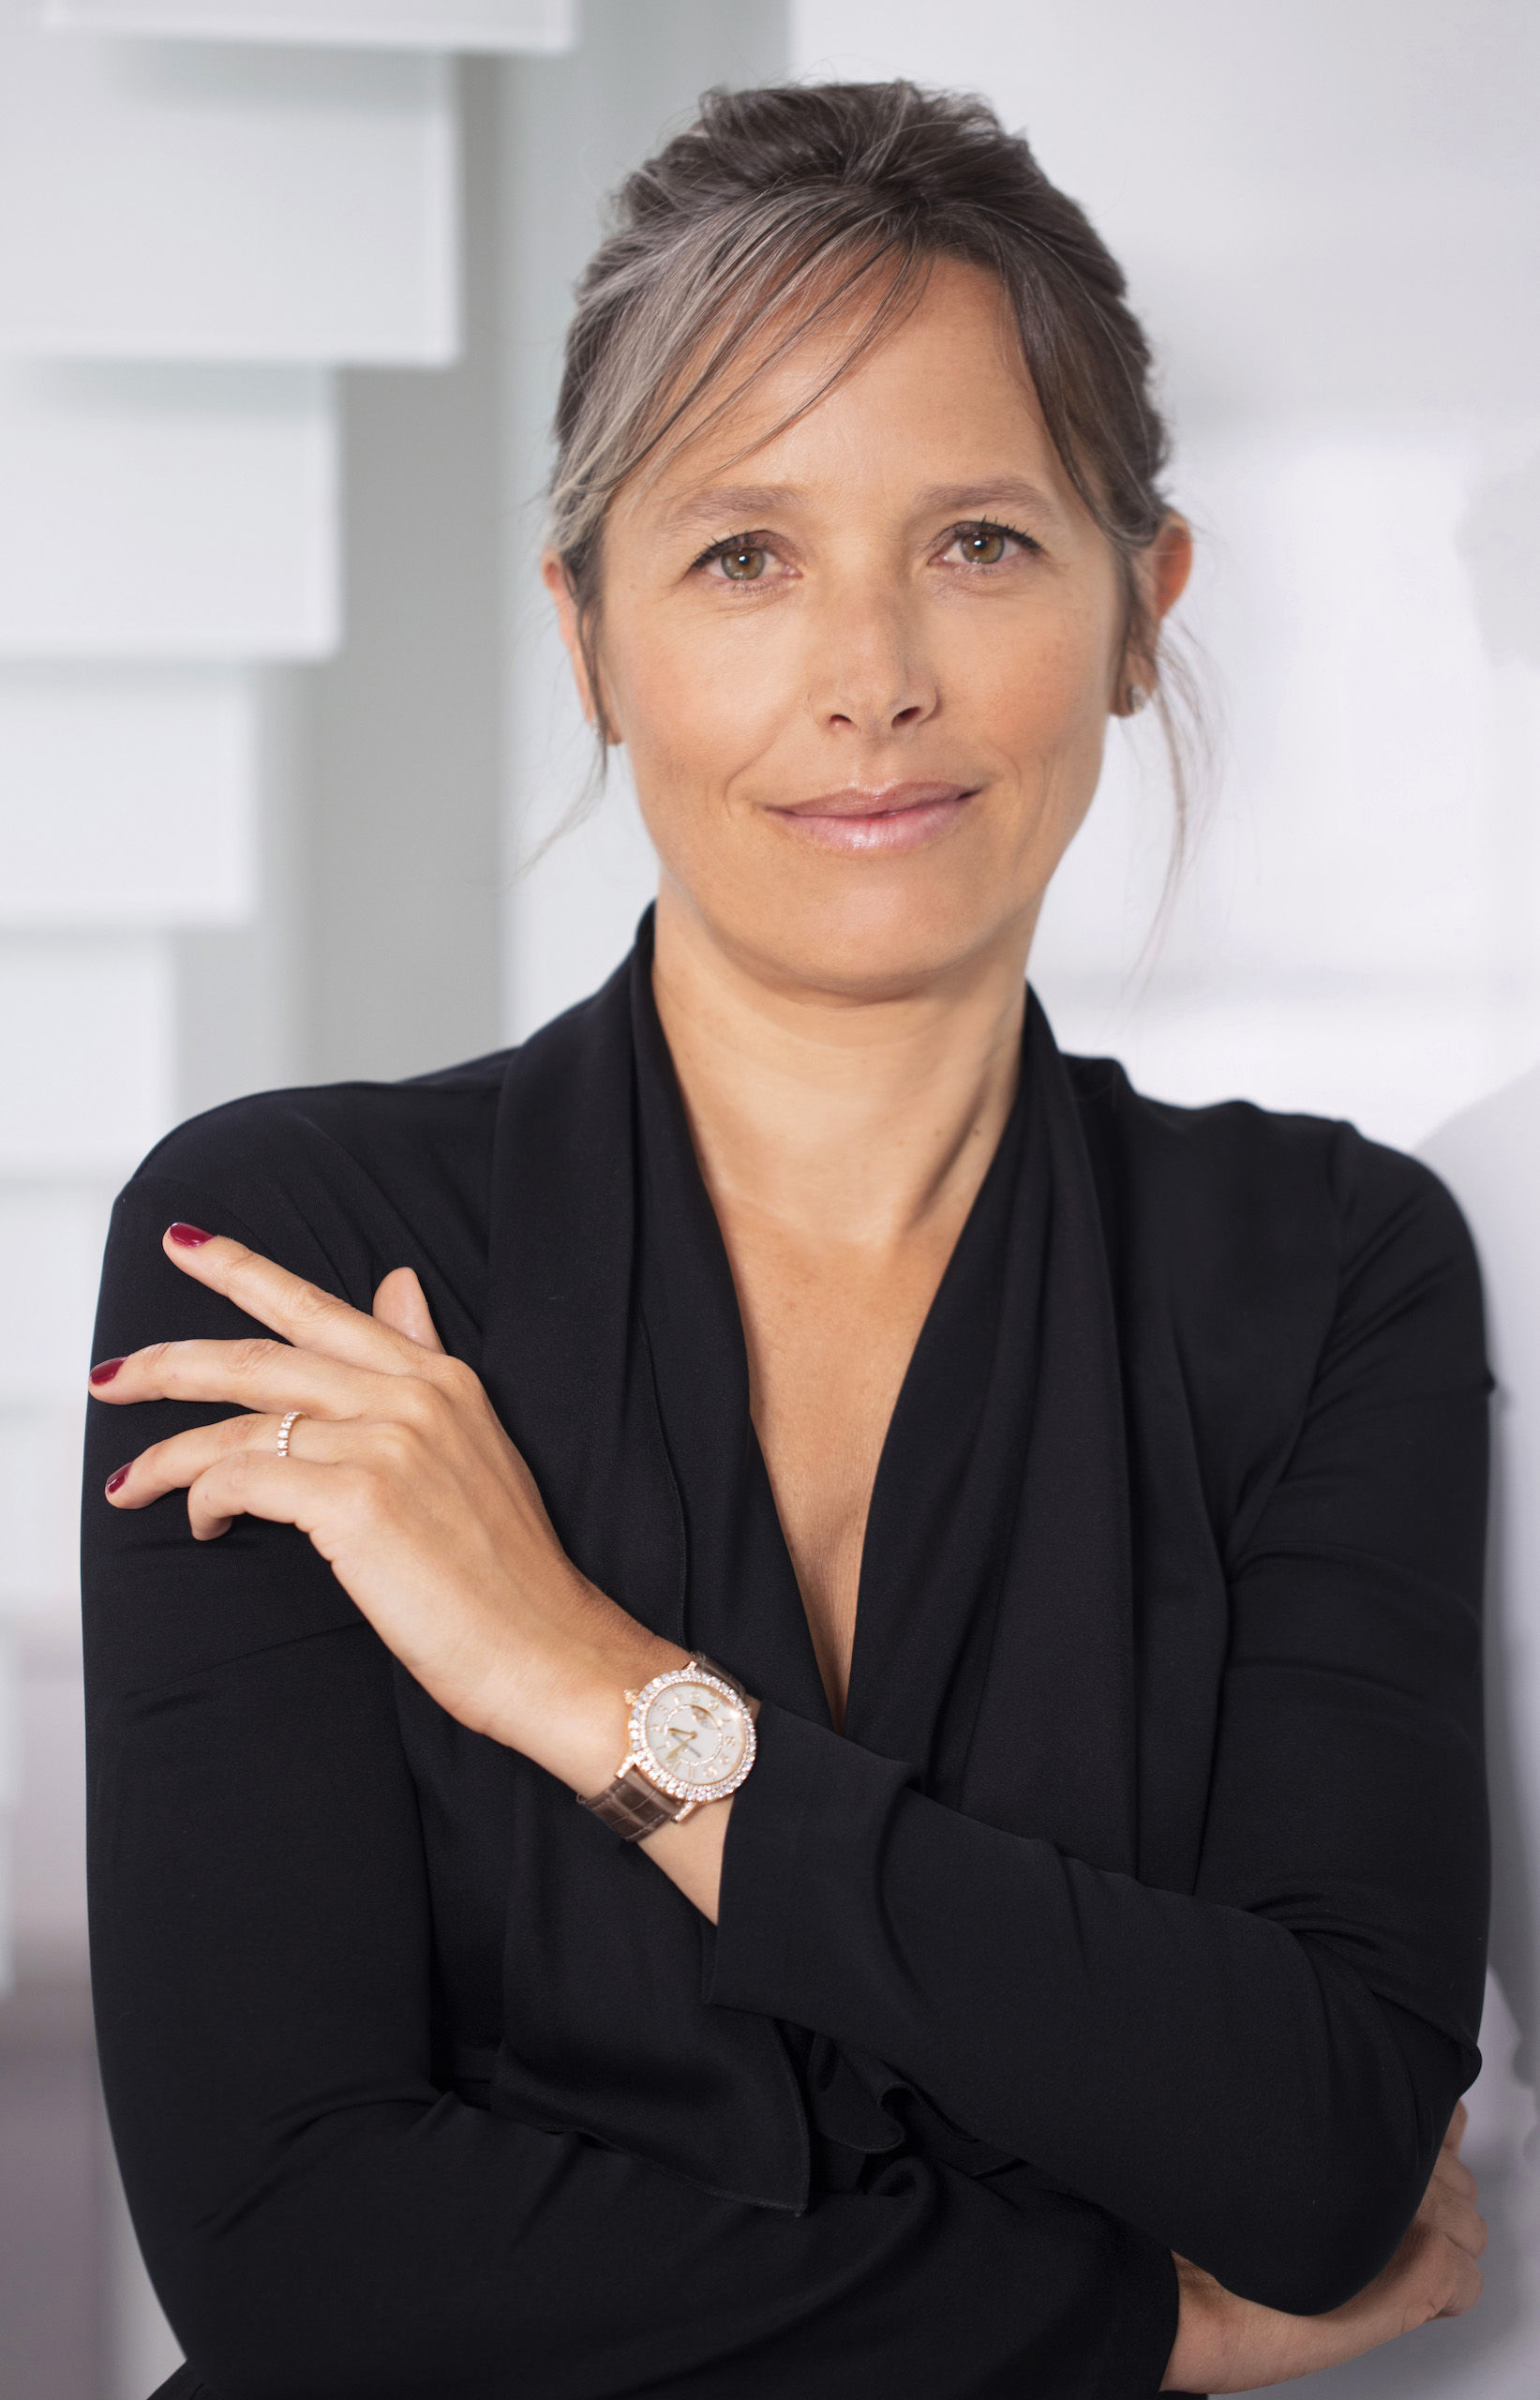 Leading Watch Industry Figures on Their Maison's Year - Catherine Renier, CEO of Jaeger-LeCoultre